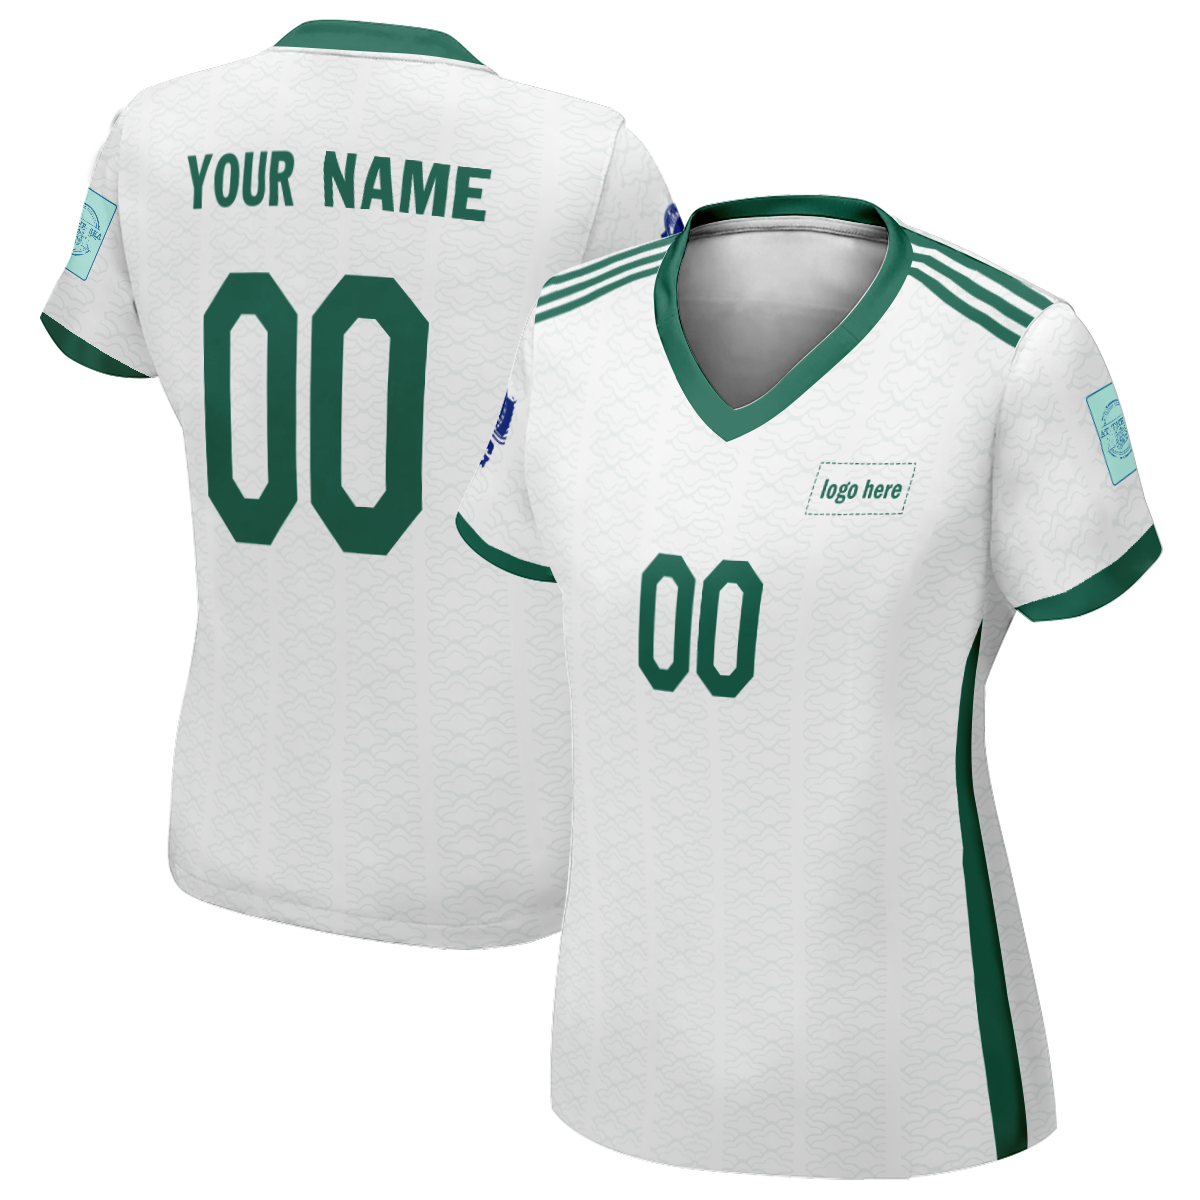 Women's Authentic Algeria World Cup Custom Soccer Jersey With Logo